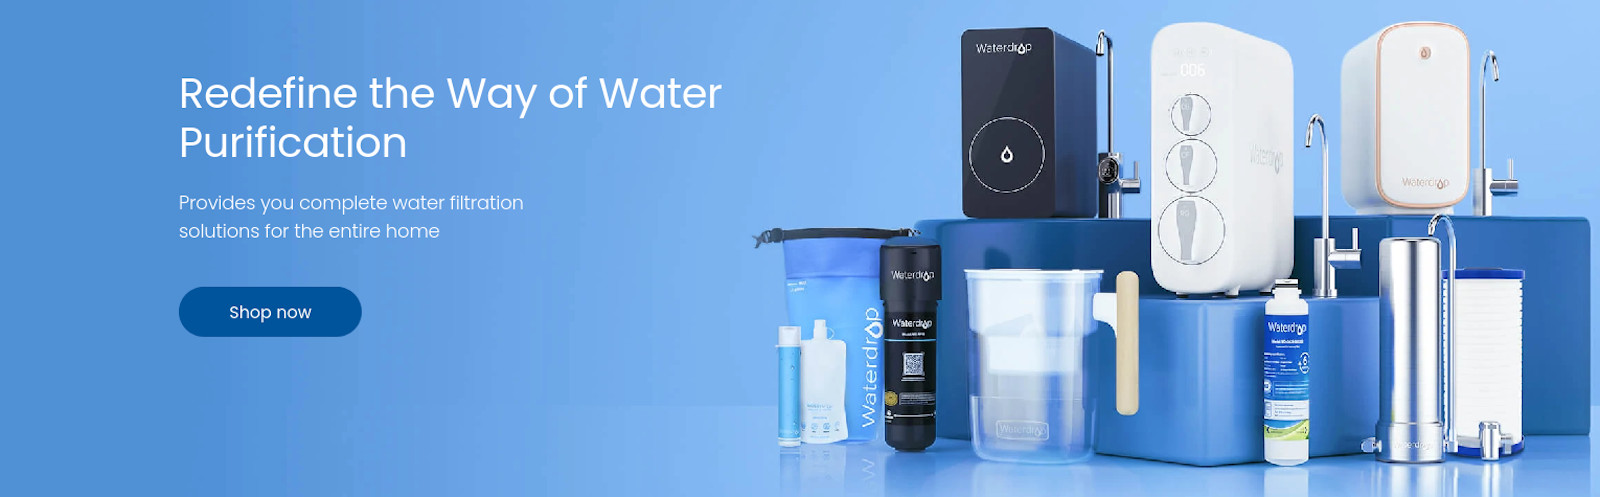 complete water filtration solutions at a bargain price